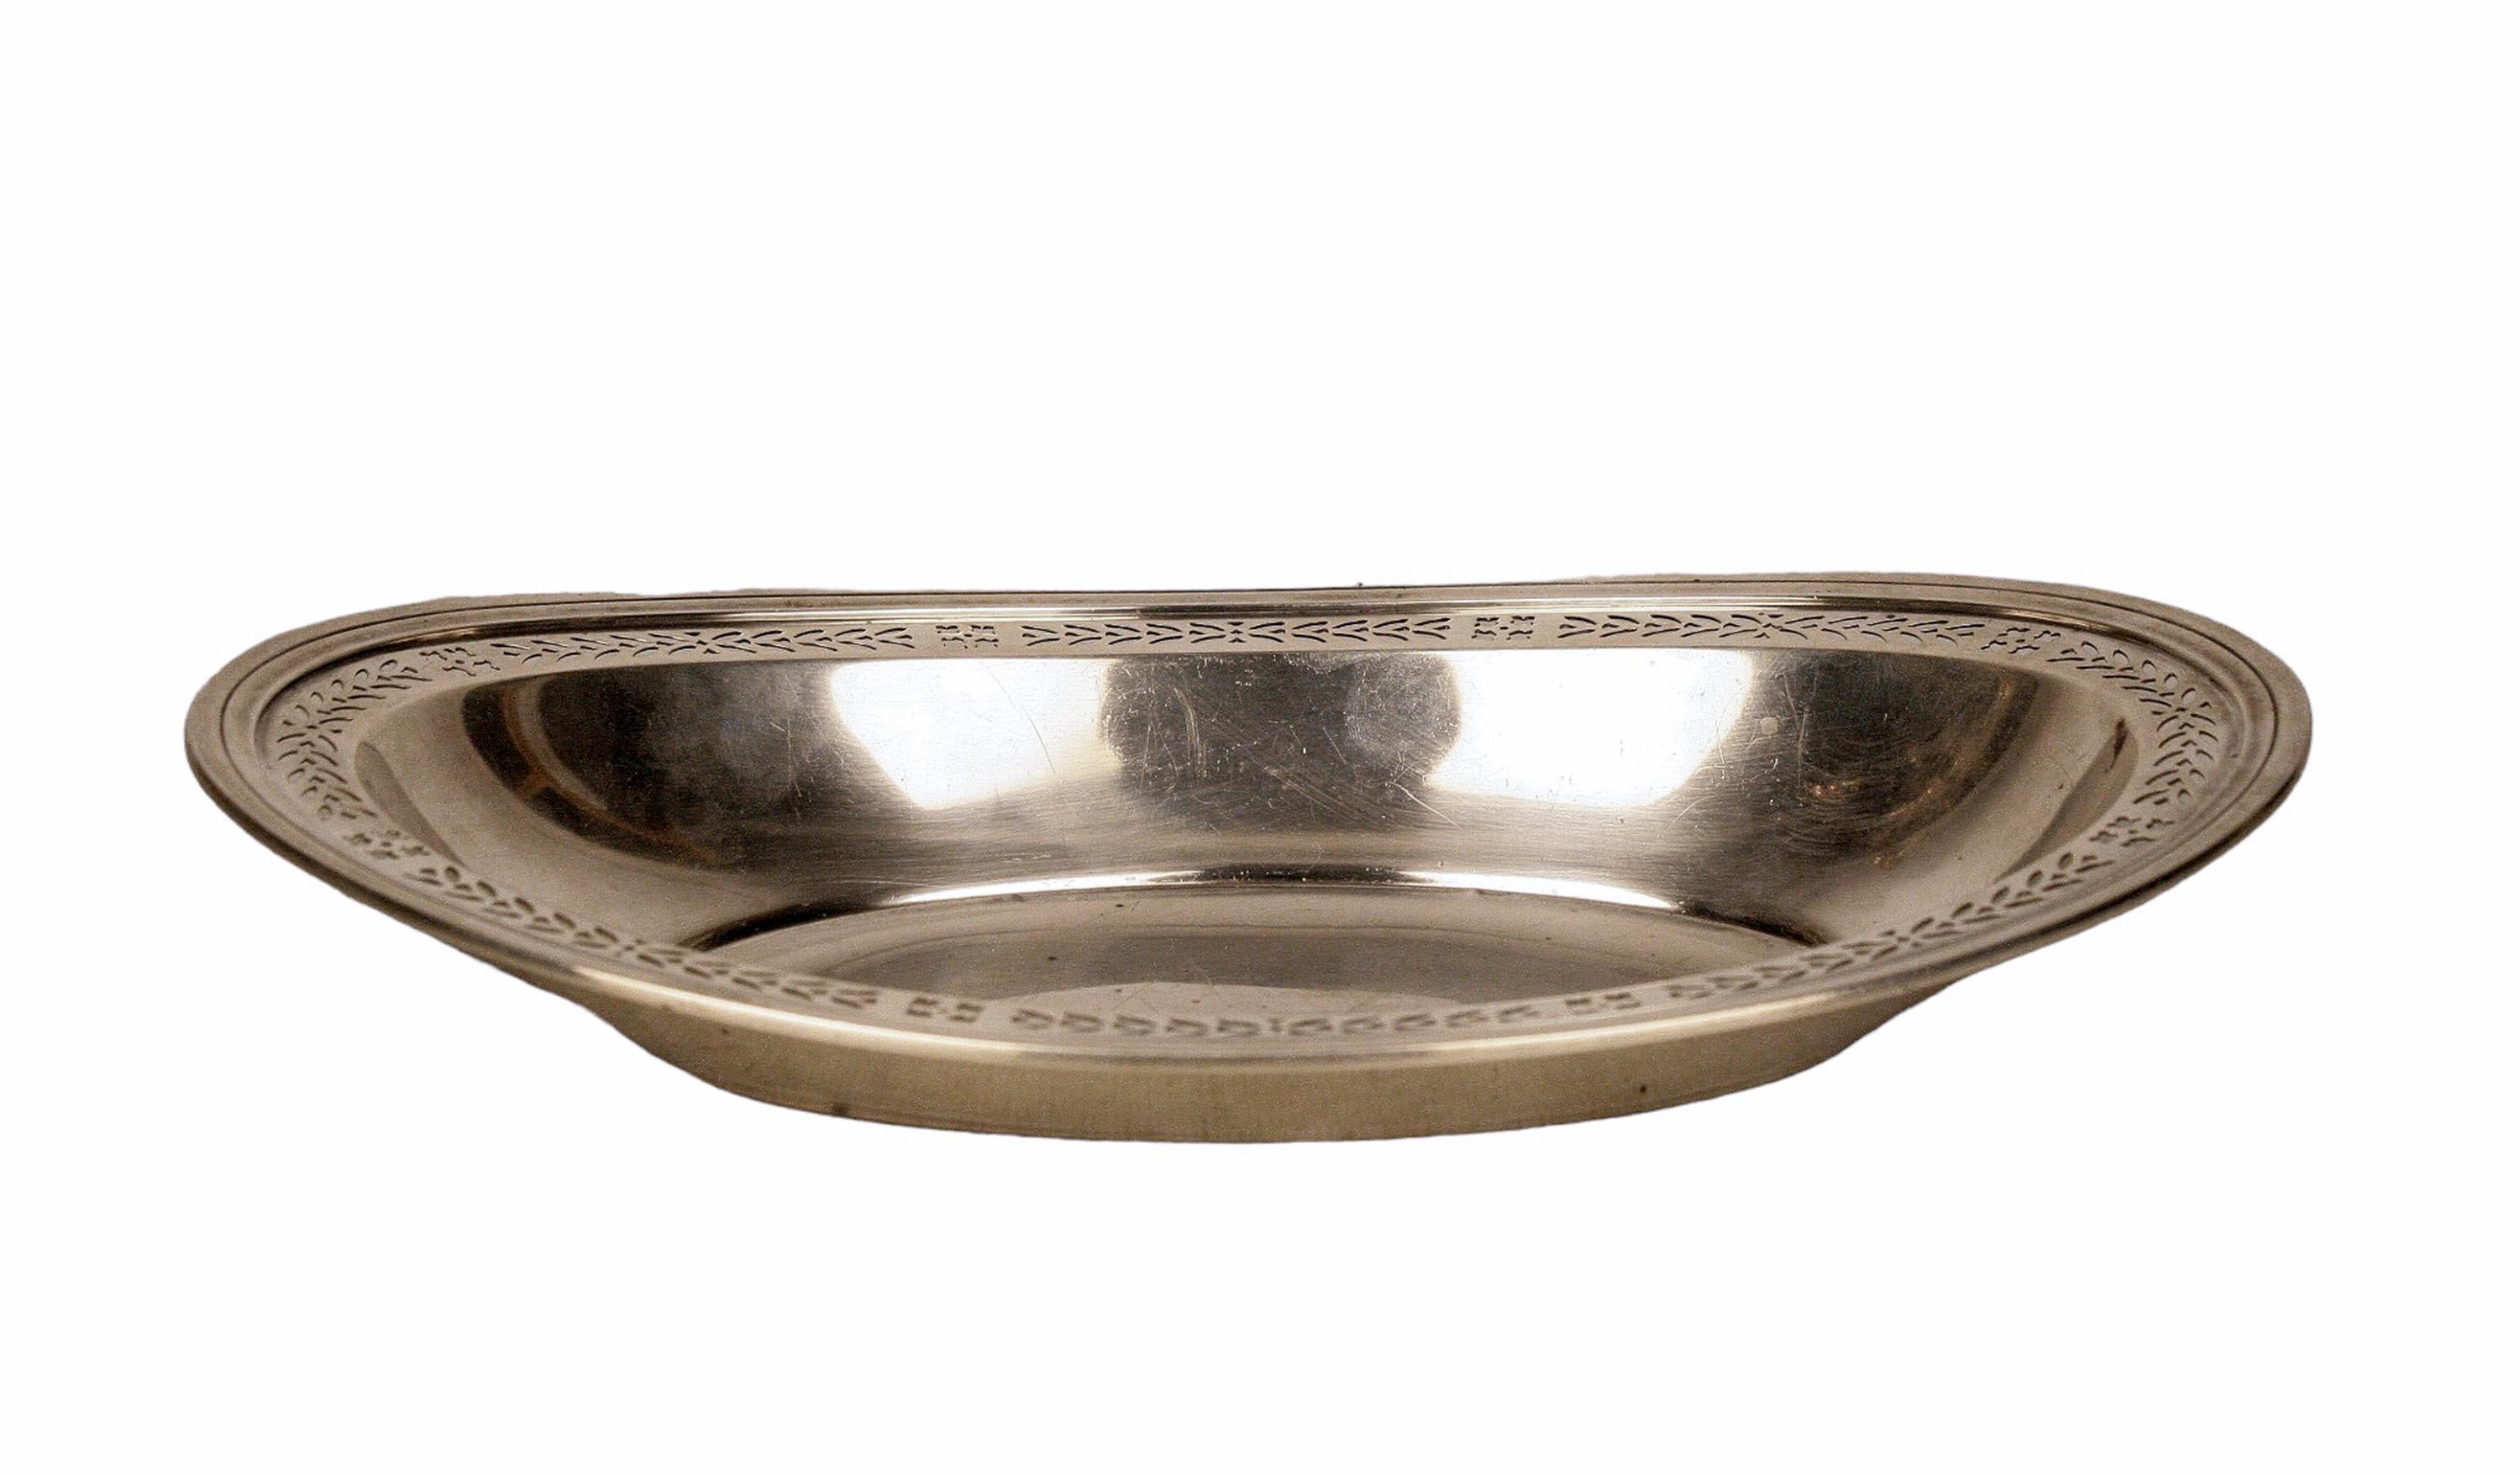 Early 20th century Art Déco sterling sIlver serving bread dish/bowl by american brand Tiffany & Co.

By: Tiffany & Co.
Material: metal, silver, silver plate, sterling silver
Technique: metalwork, polished, cast, molded, plated, silvered
Dimensions: